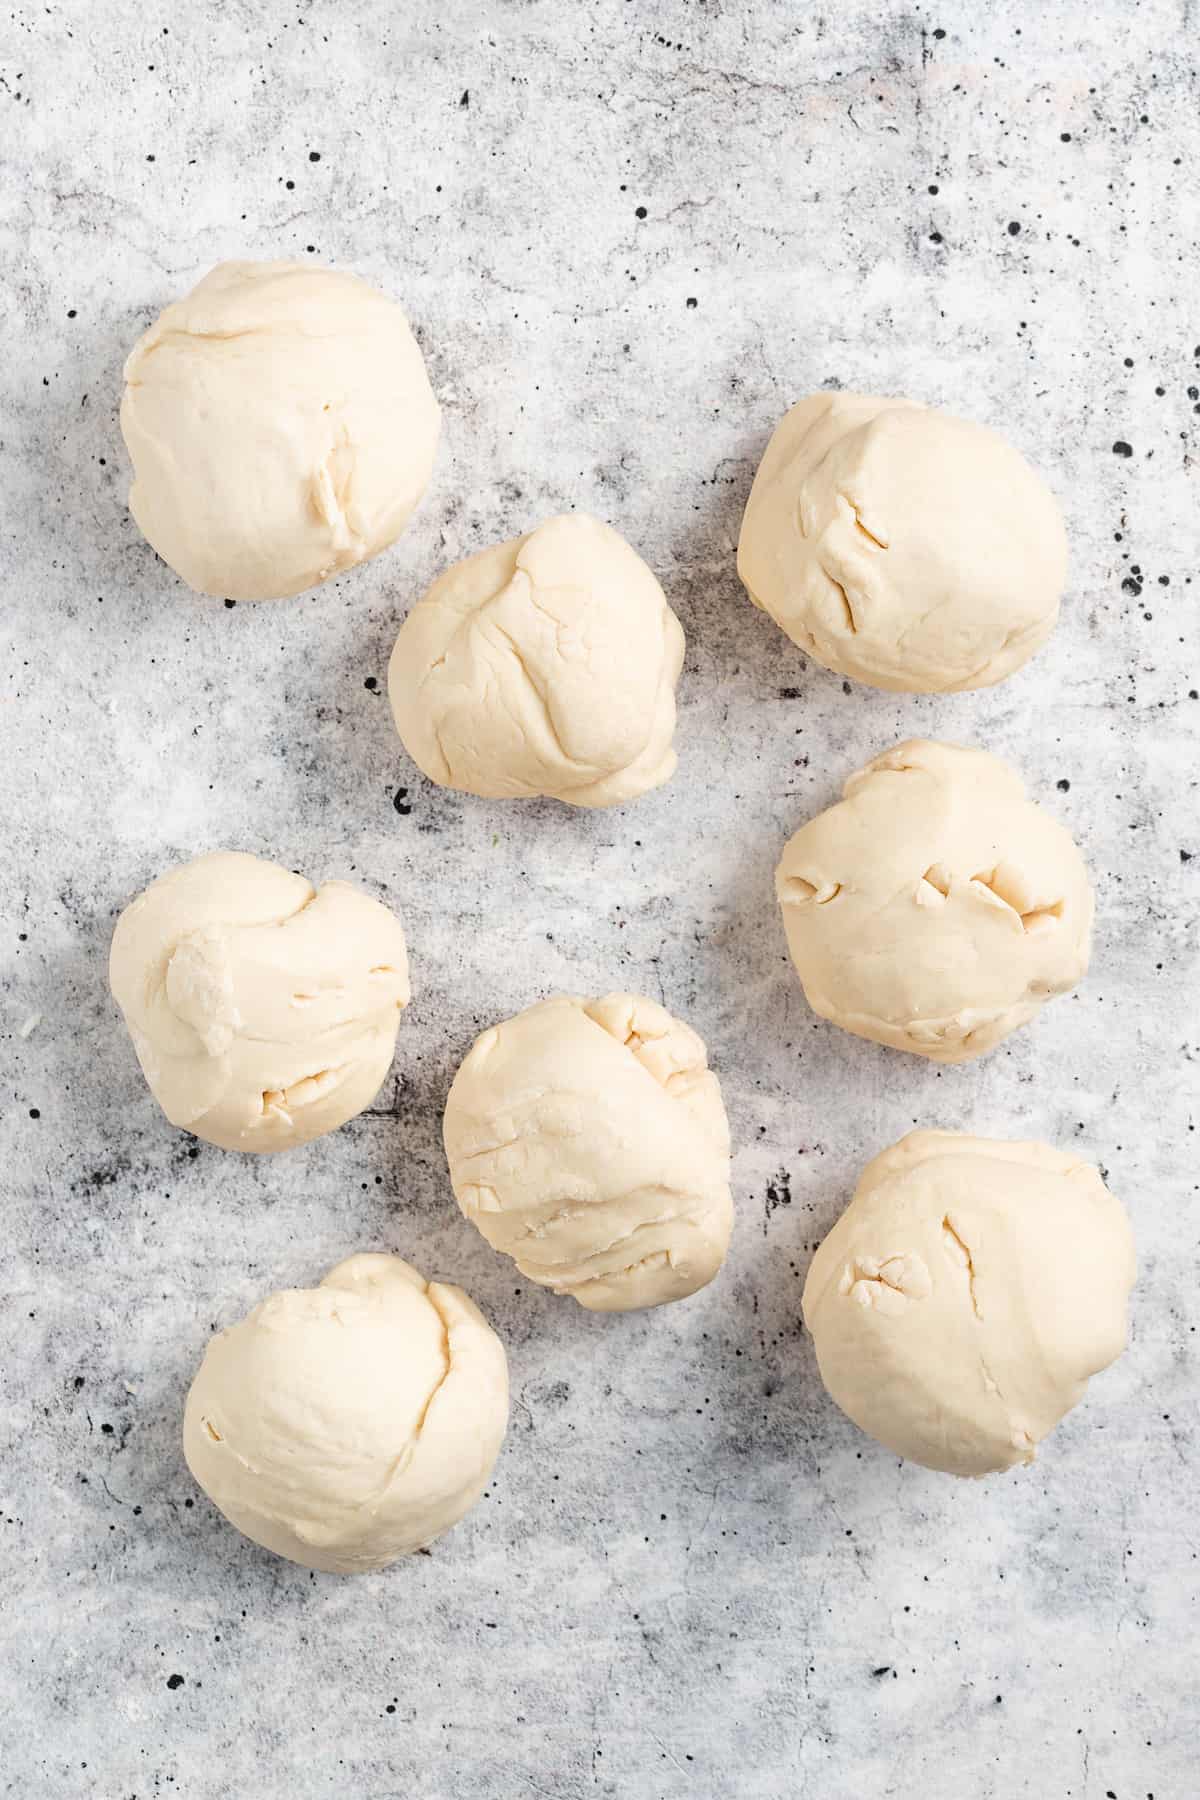 Rolling the pieces of dough into little balls.